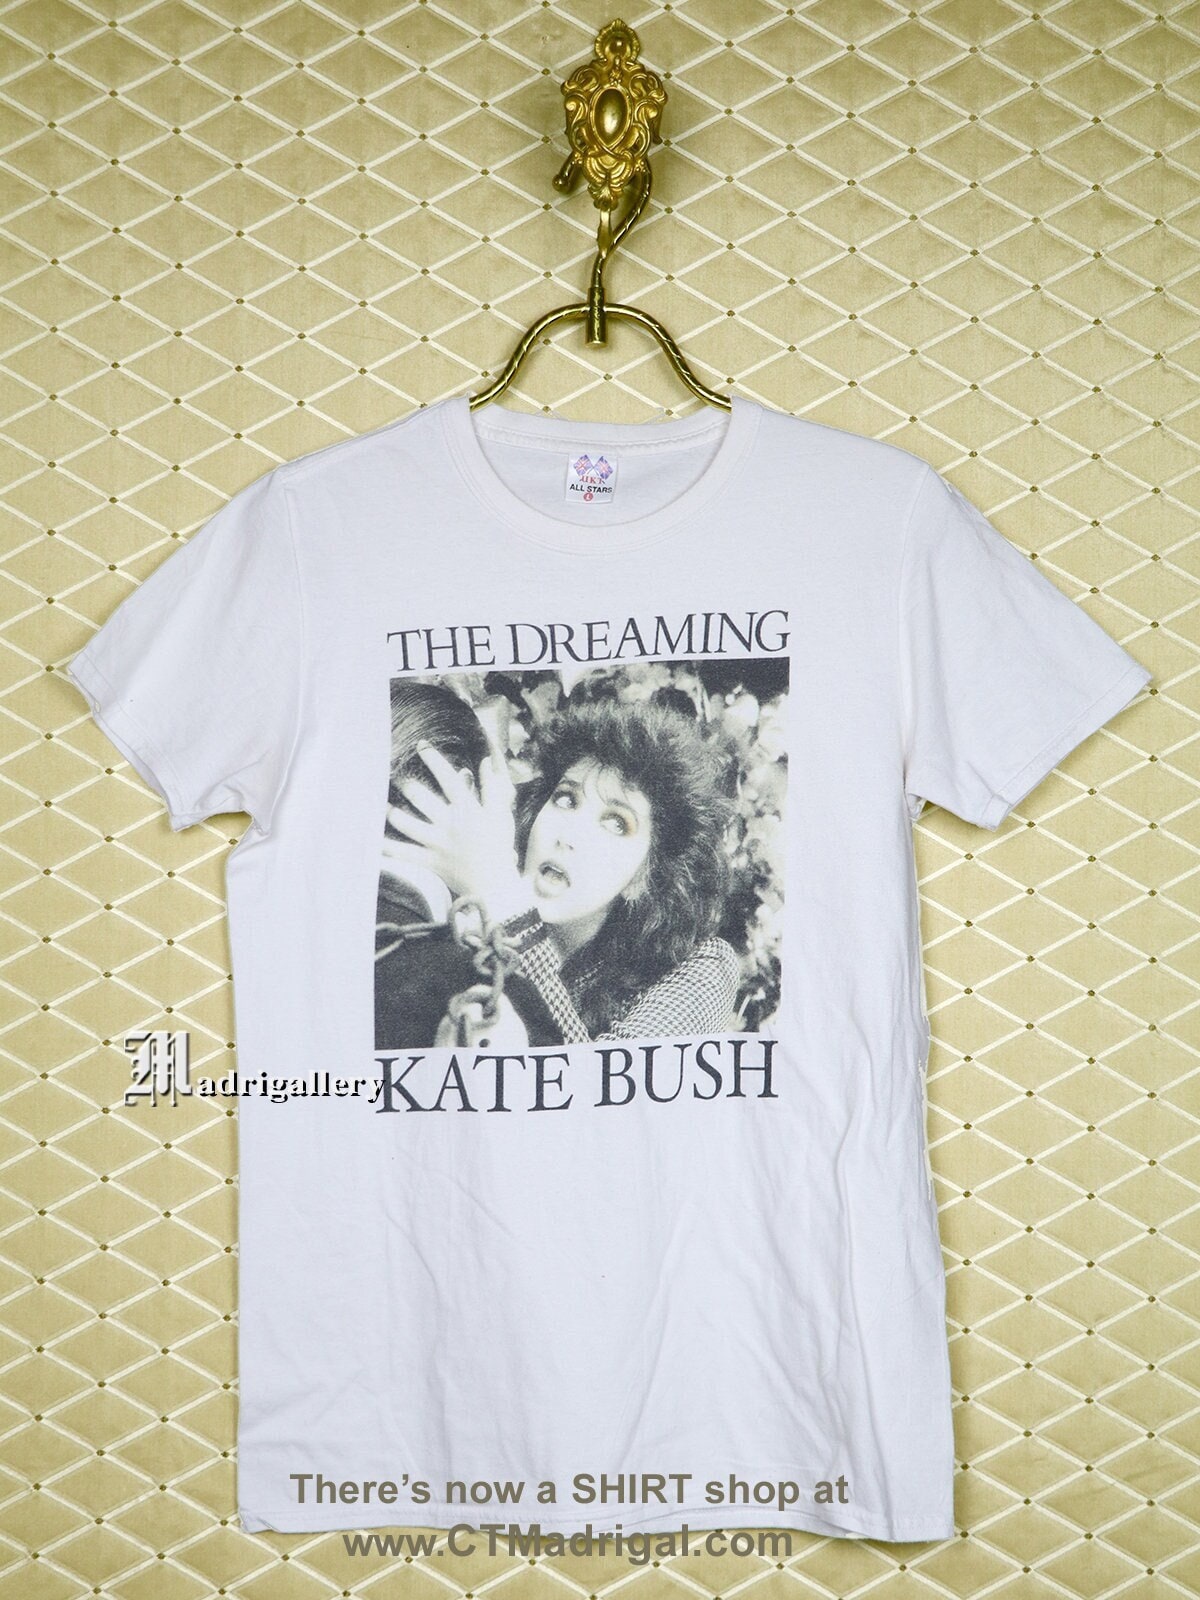 Retro Review: Kate Bush and “The Dreaming”, by Garry Berman